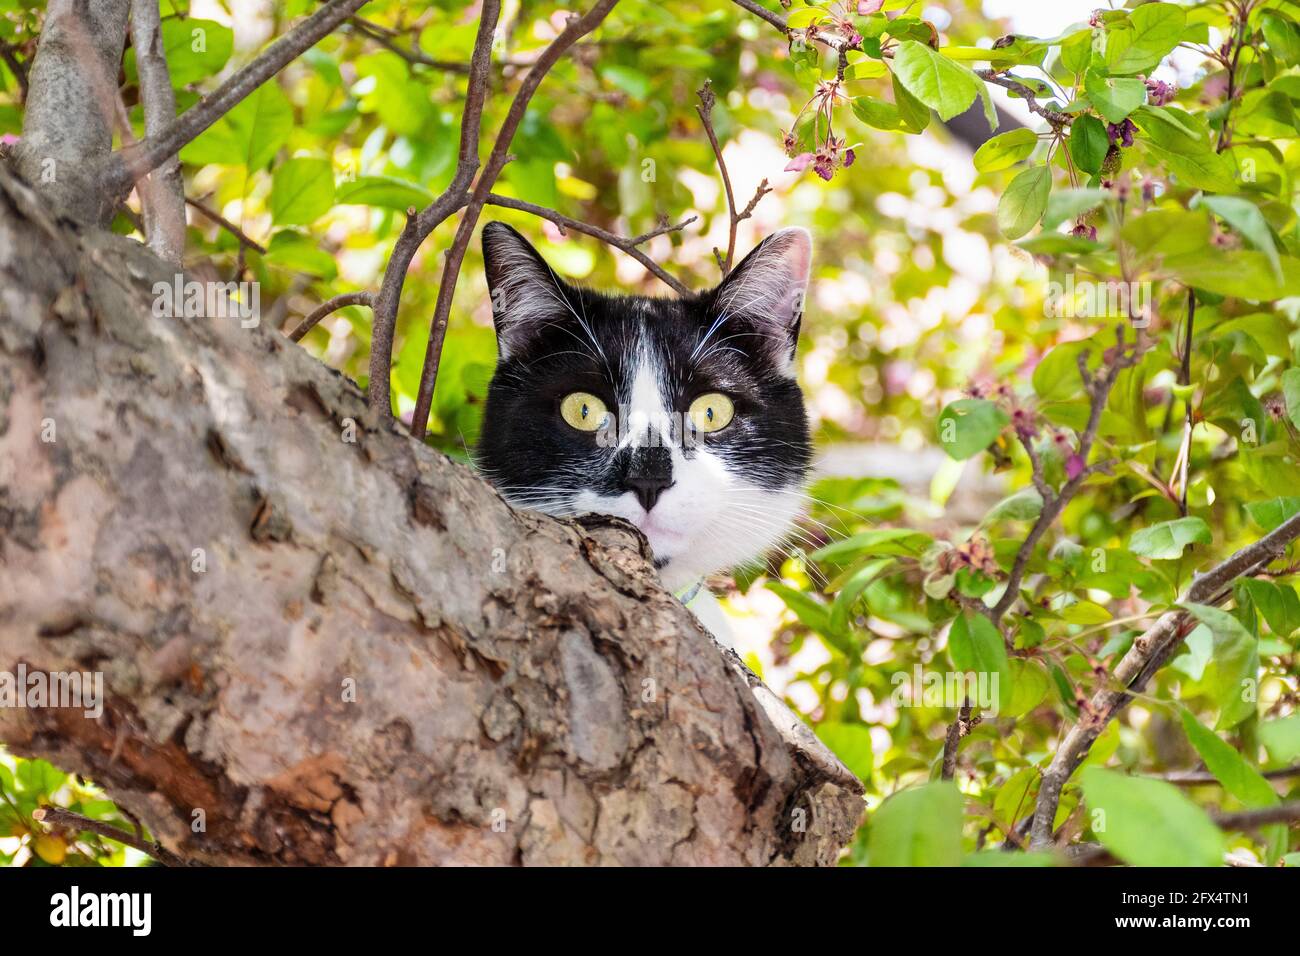 Beautiful portrait of a cat perched in a tree Stock Photo